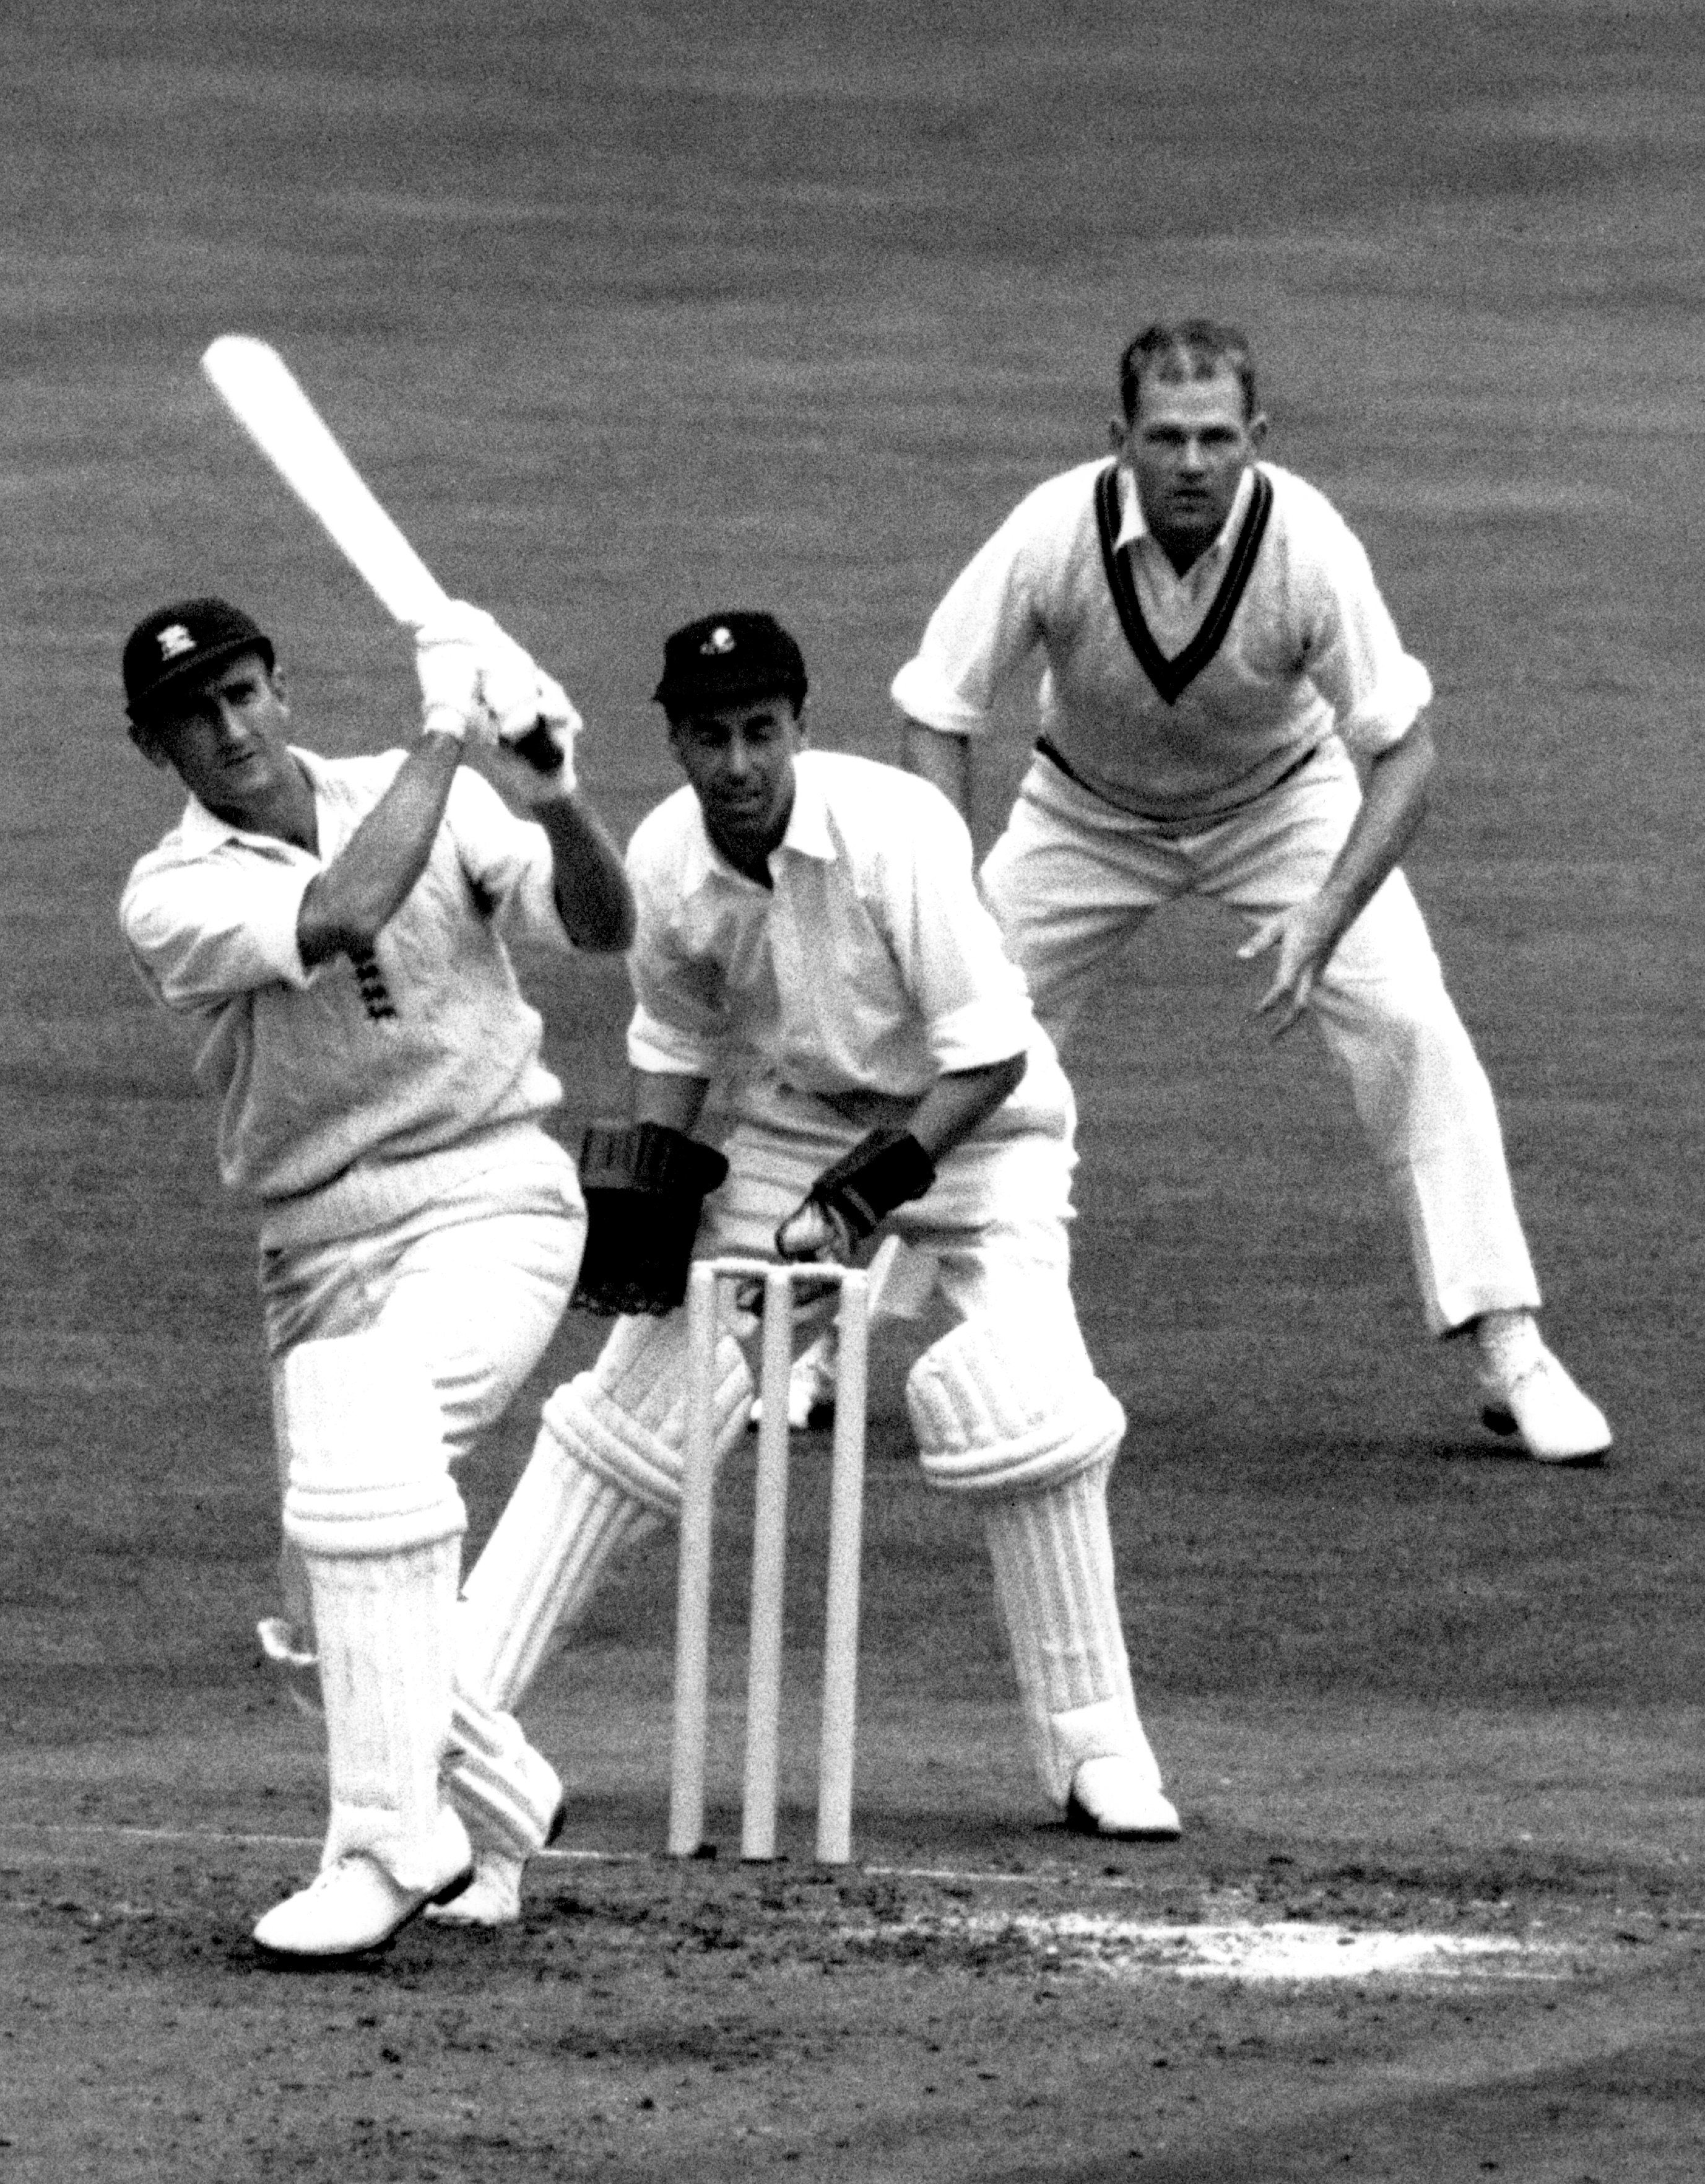 Dexter hits a four during England’s first innings in the Fifth Test at the Oval against South Africa in 1960